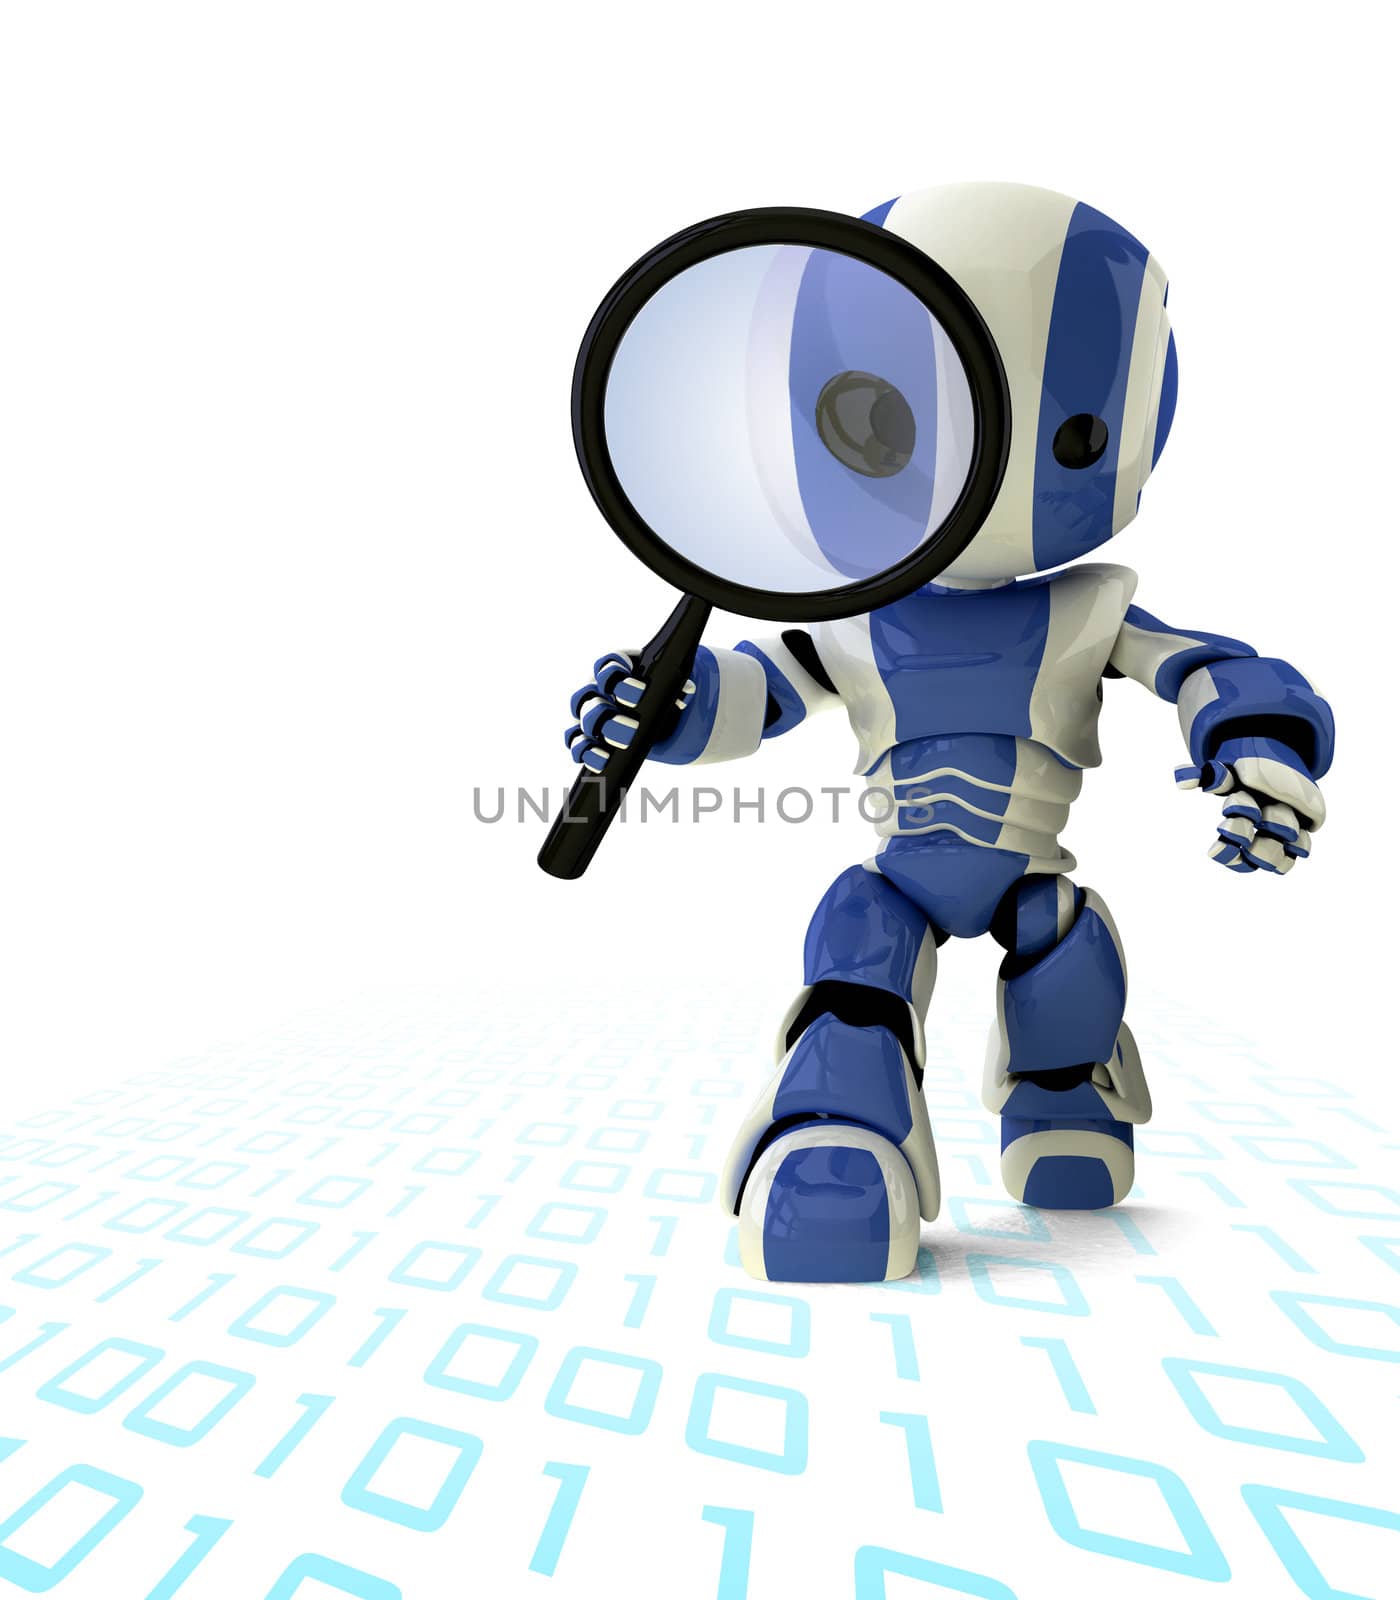 Glossy Robot with Magnifying Glass by LeoBlanchette